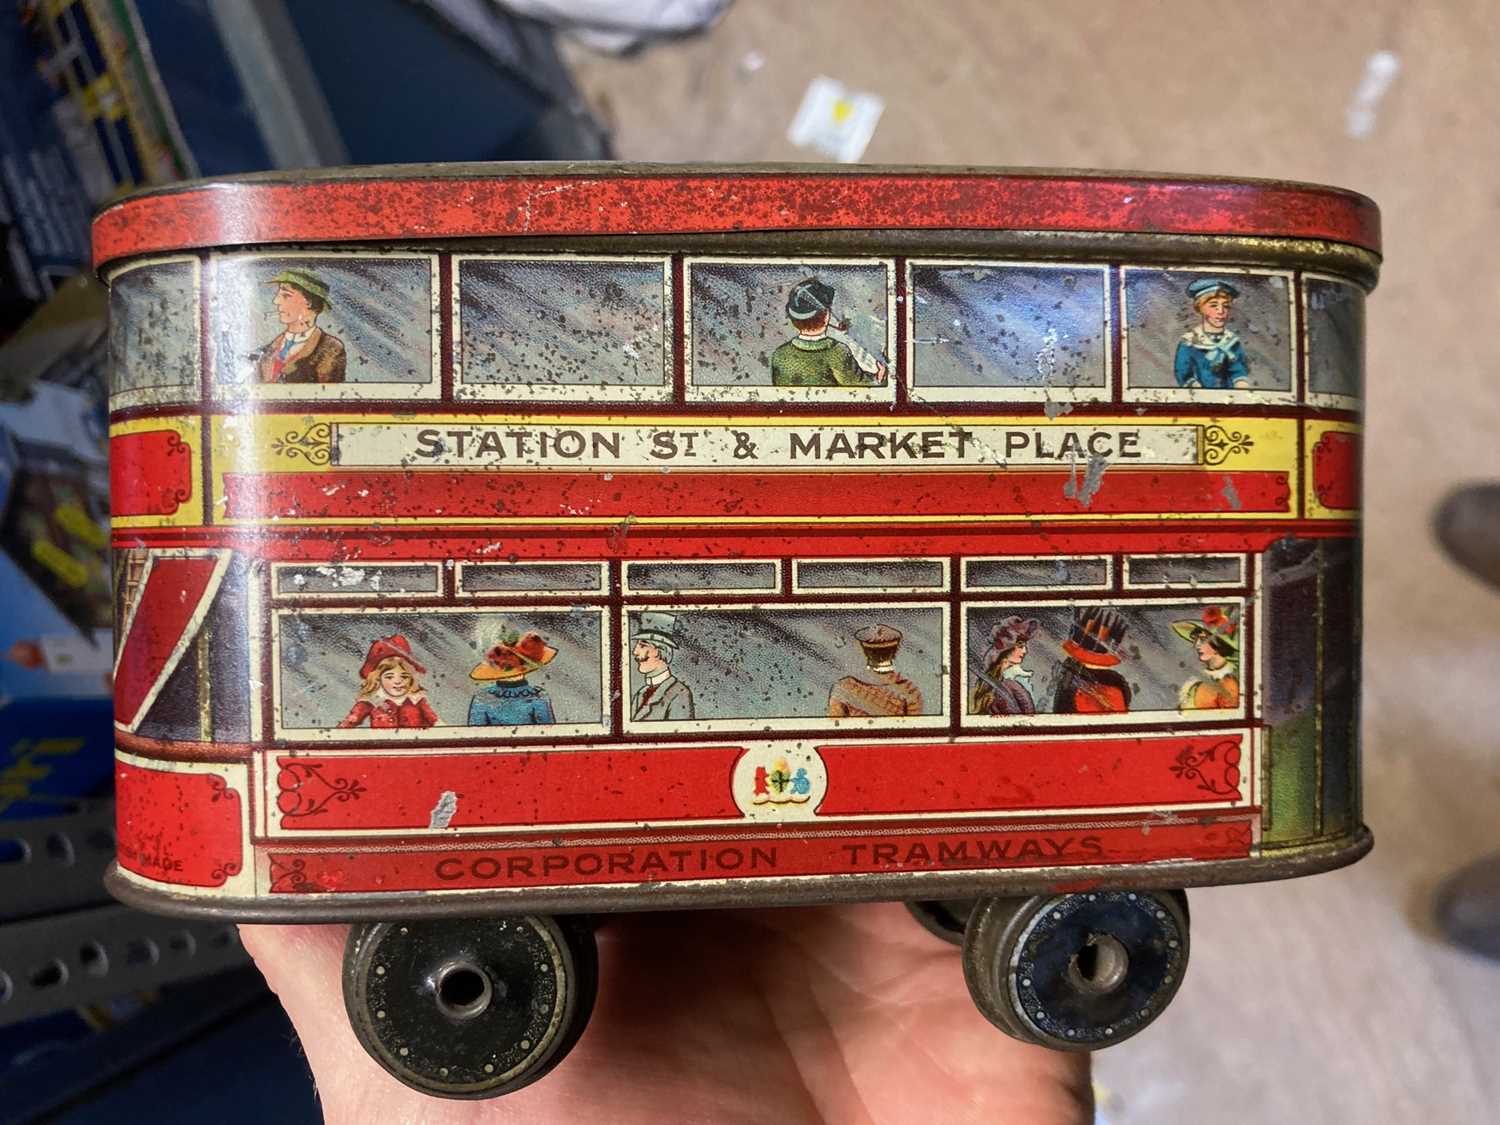 Tinplate biscuit tin tram and Gray Dunn’s biscuits bus, some rusting, paint damage fair and a - Image 5 of 6